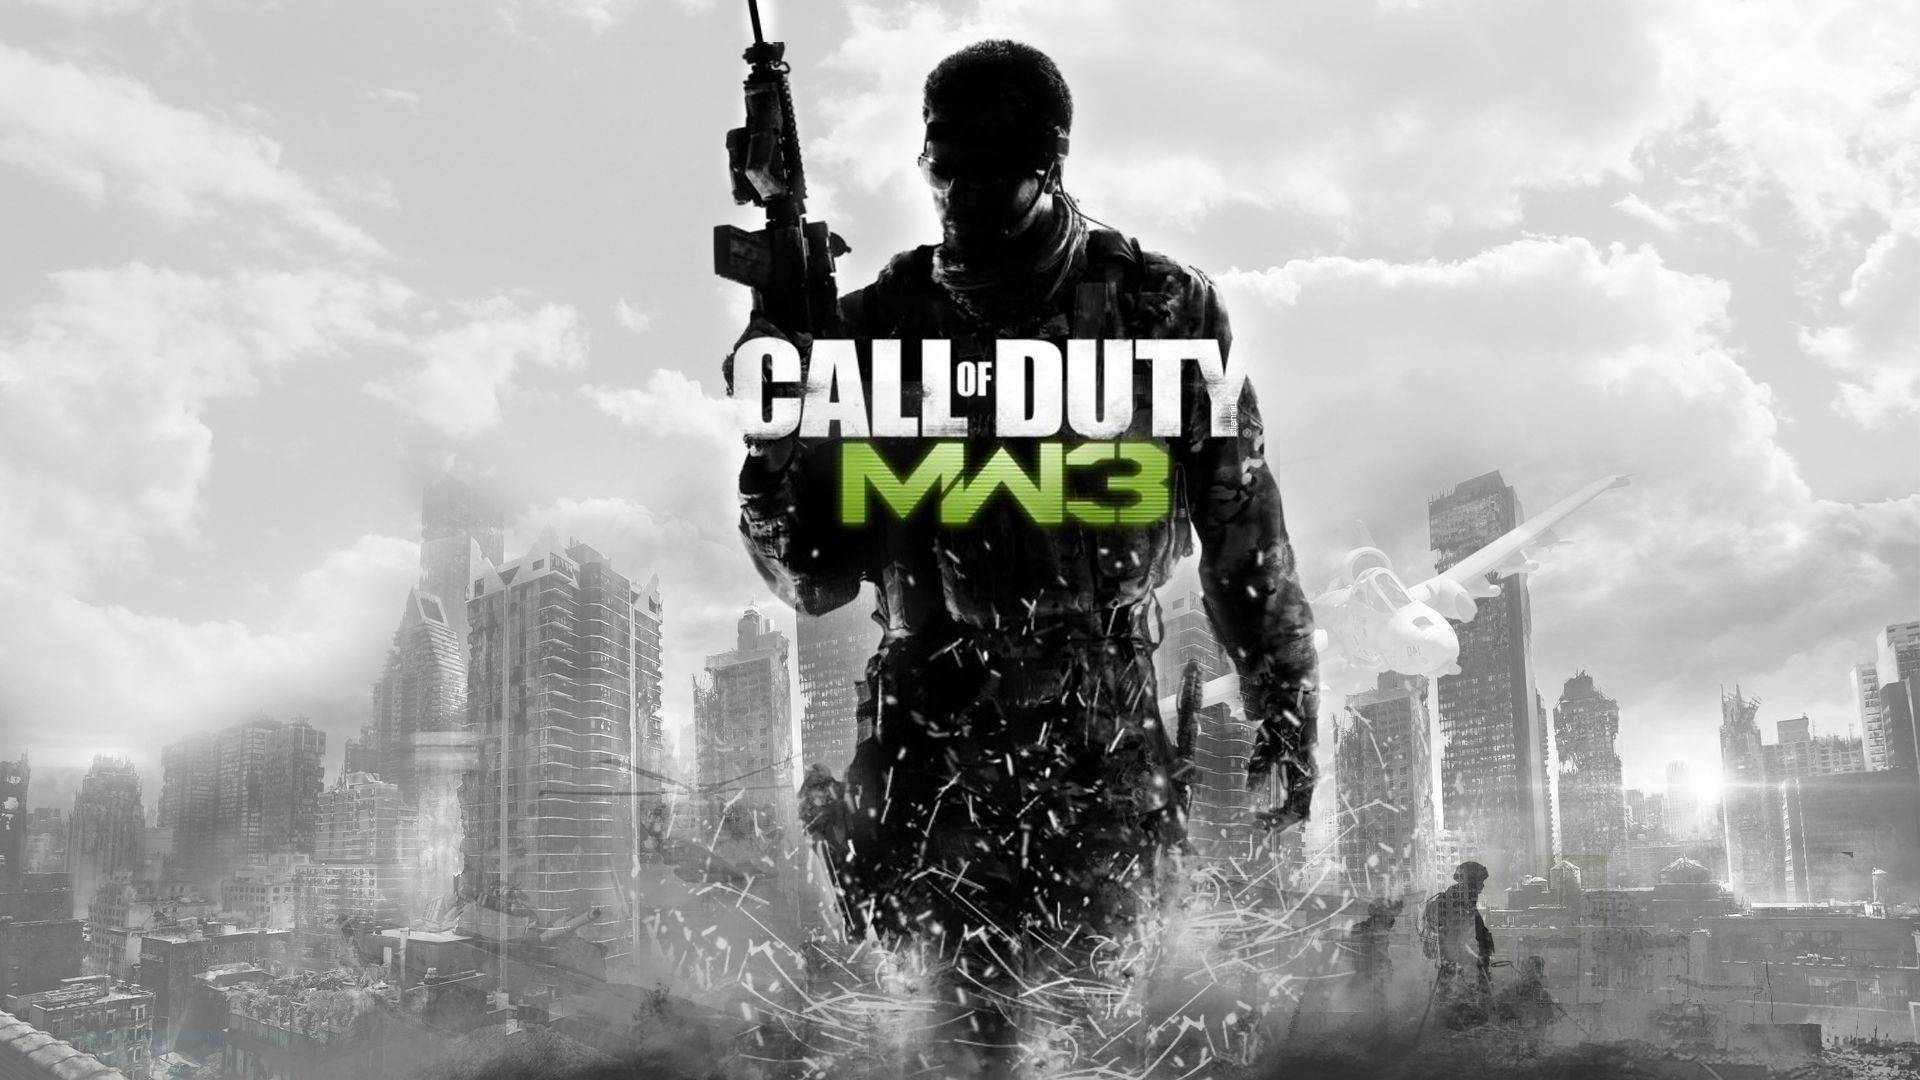 Call of Duty: MW3 HD Wallpapers #1 - 1920x1080